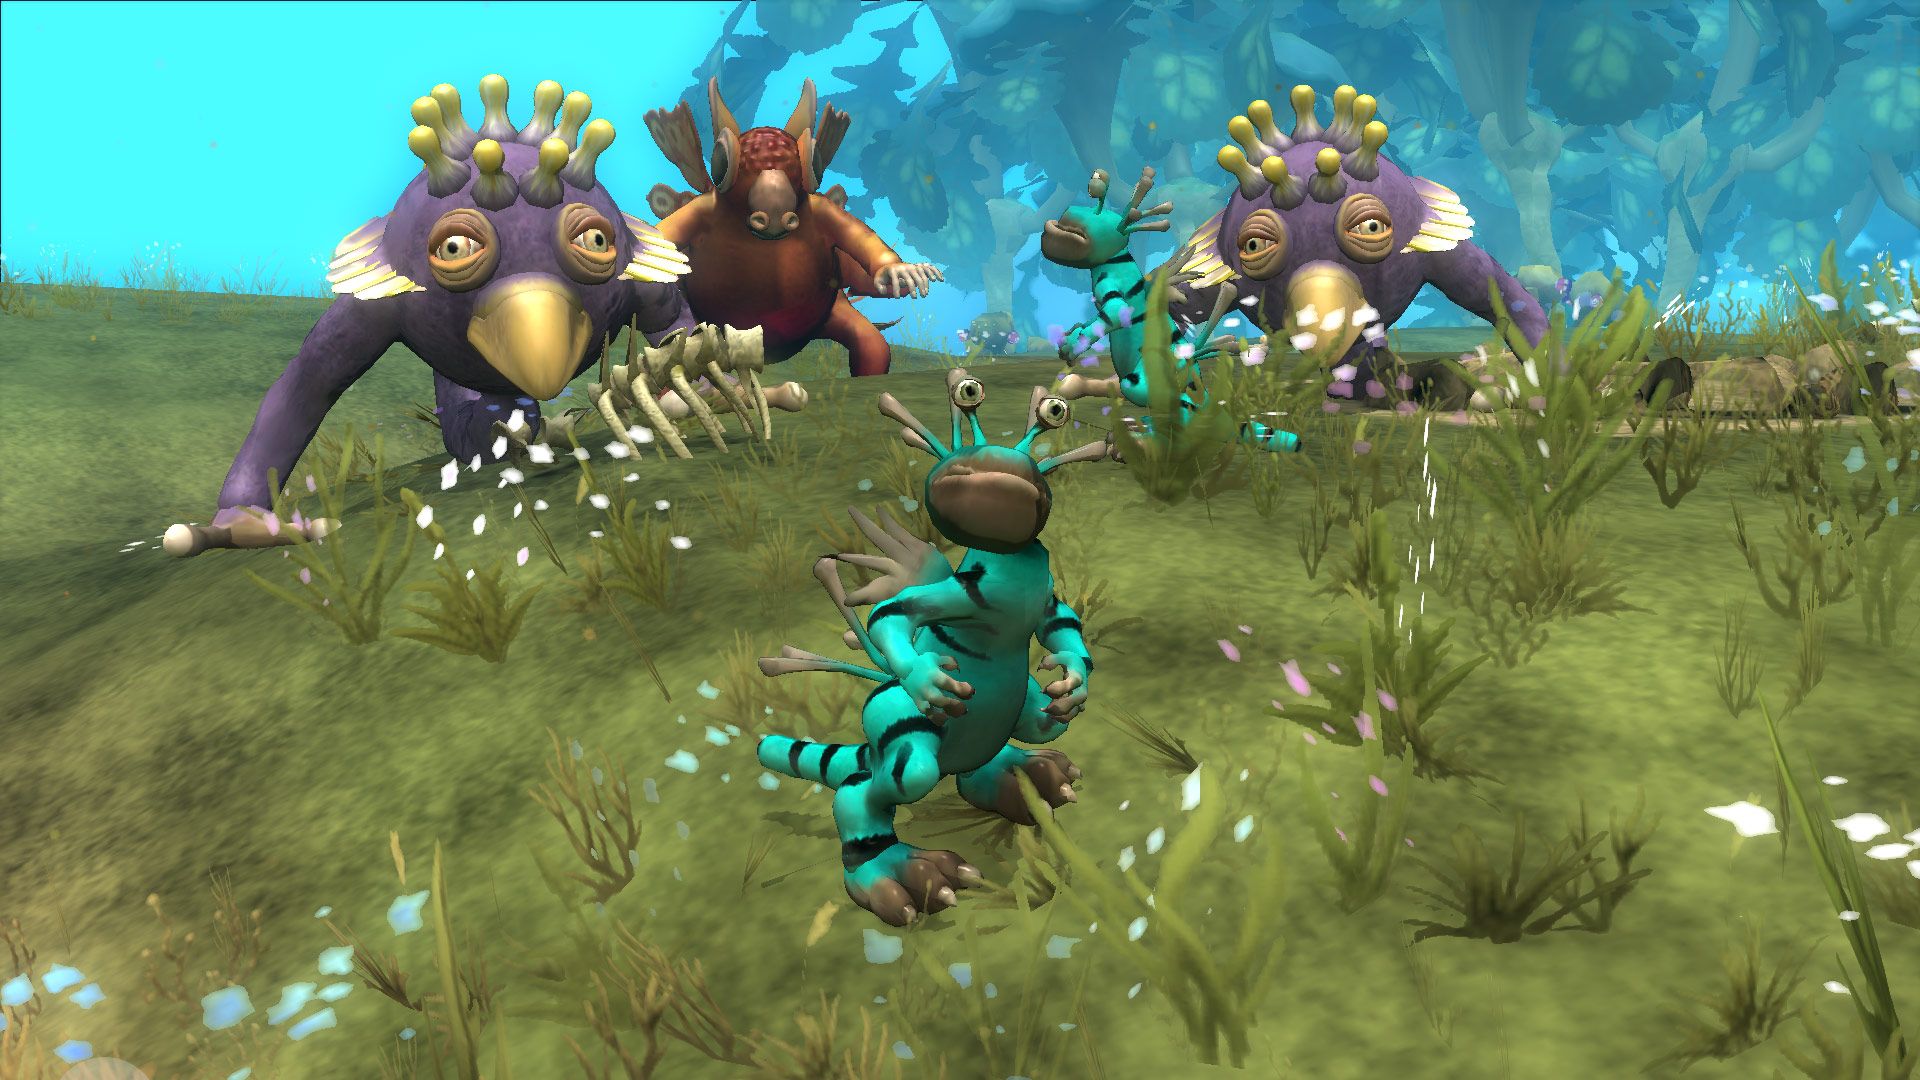 Video game screenshot of space aliens standing on grass